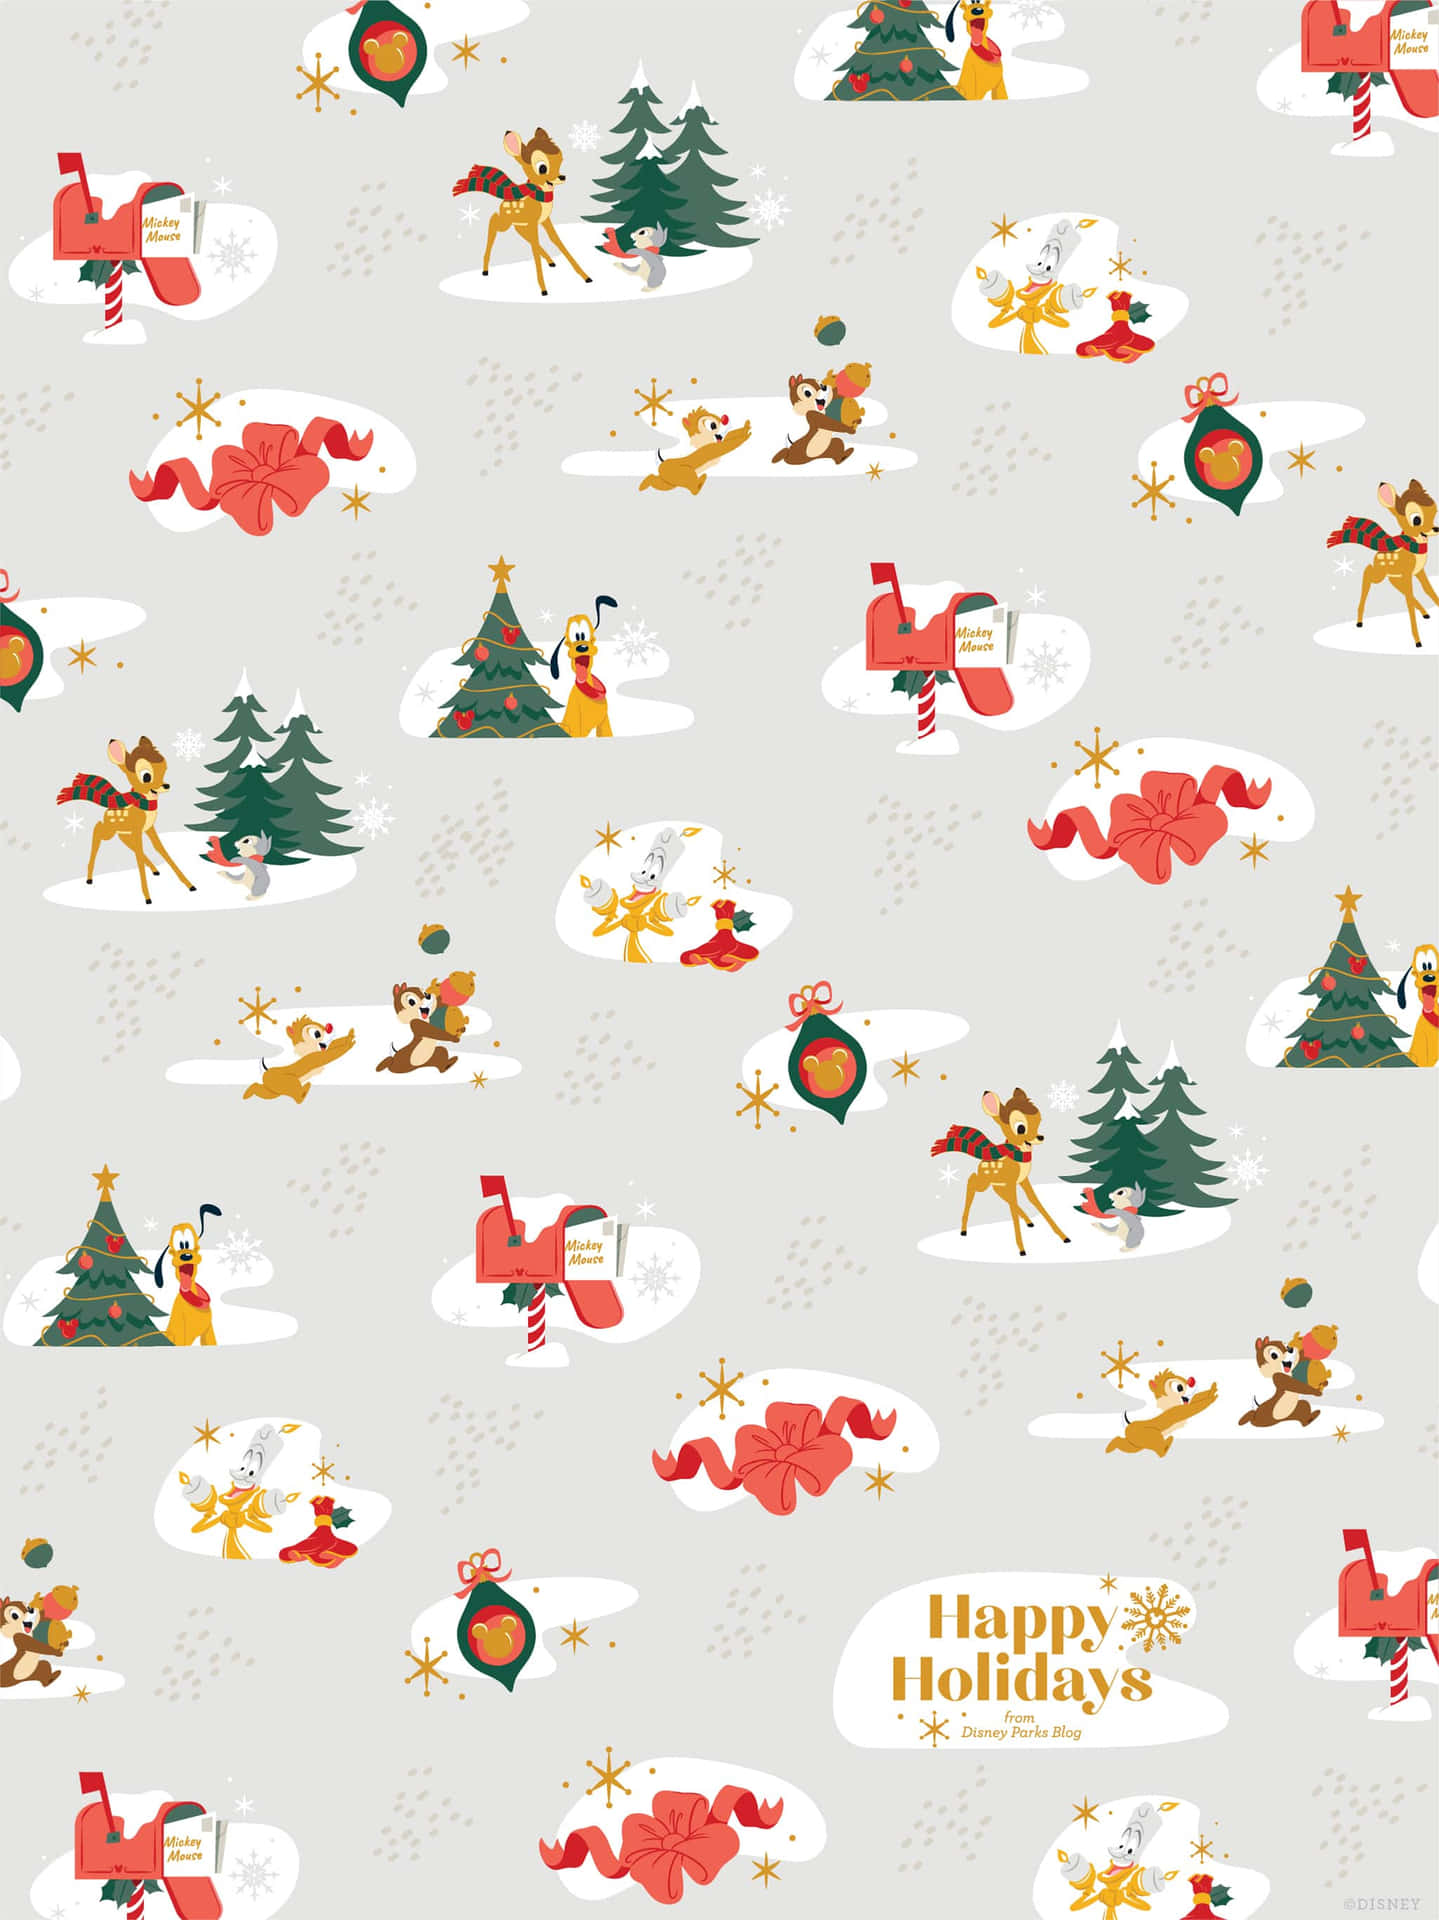 Disney Christmas Ipad With Chip And Dale Wallpaper